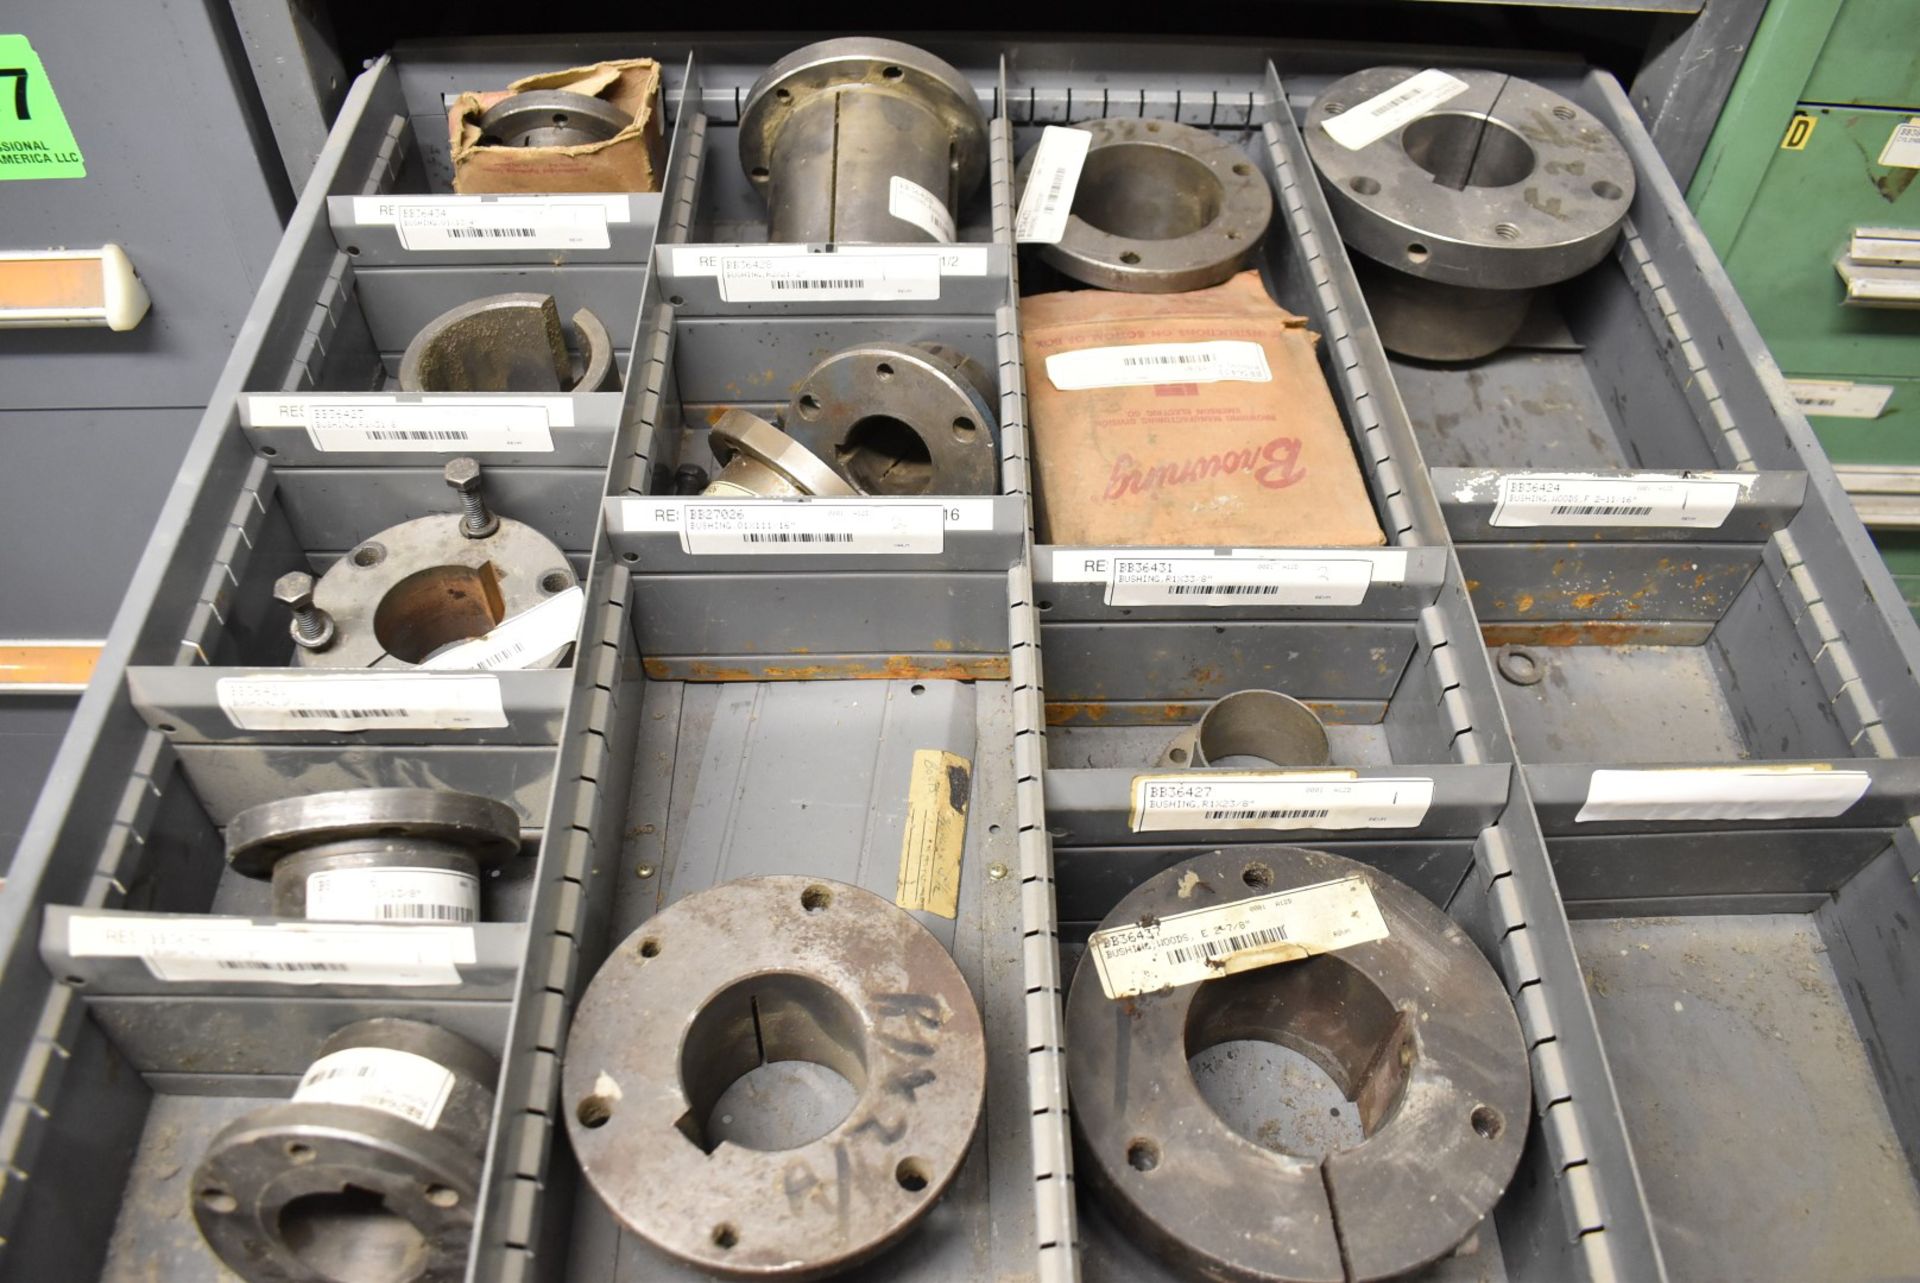 LOT/ CONTENTS OF CABINET - INCLUDING O-RINGS, BUSHINGS, SPROCKETS, BELTS, SPARE PARTS (TOOL - Image 3 of 5